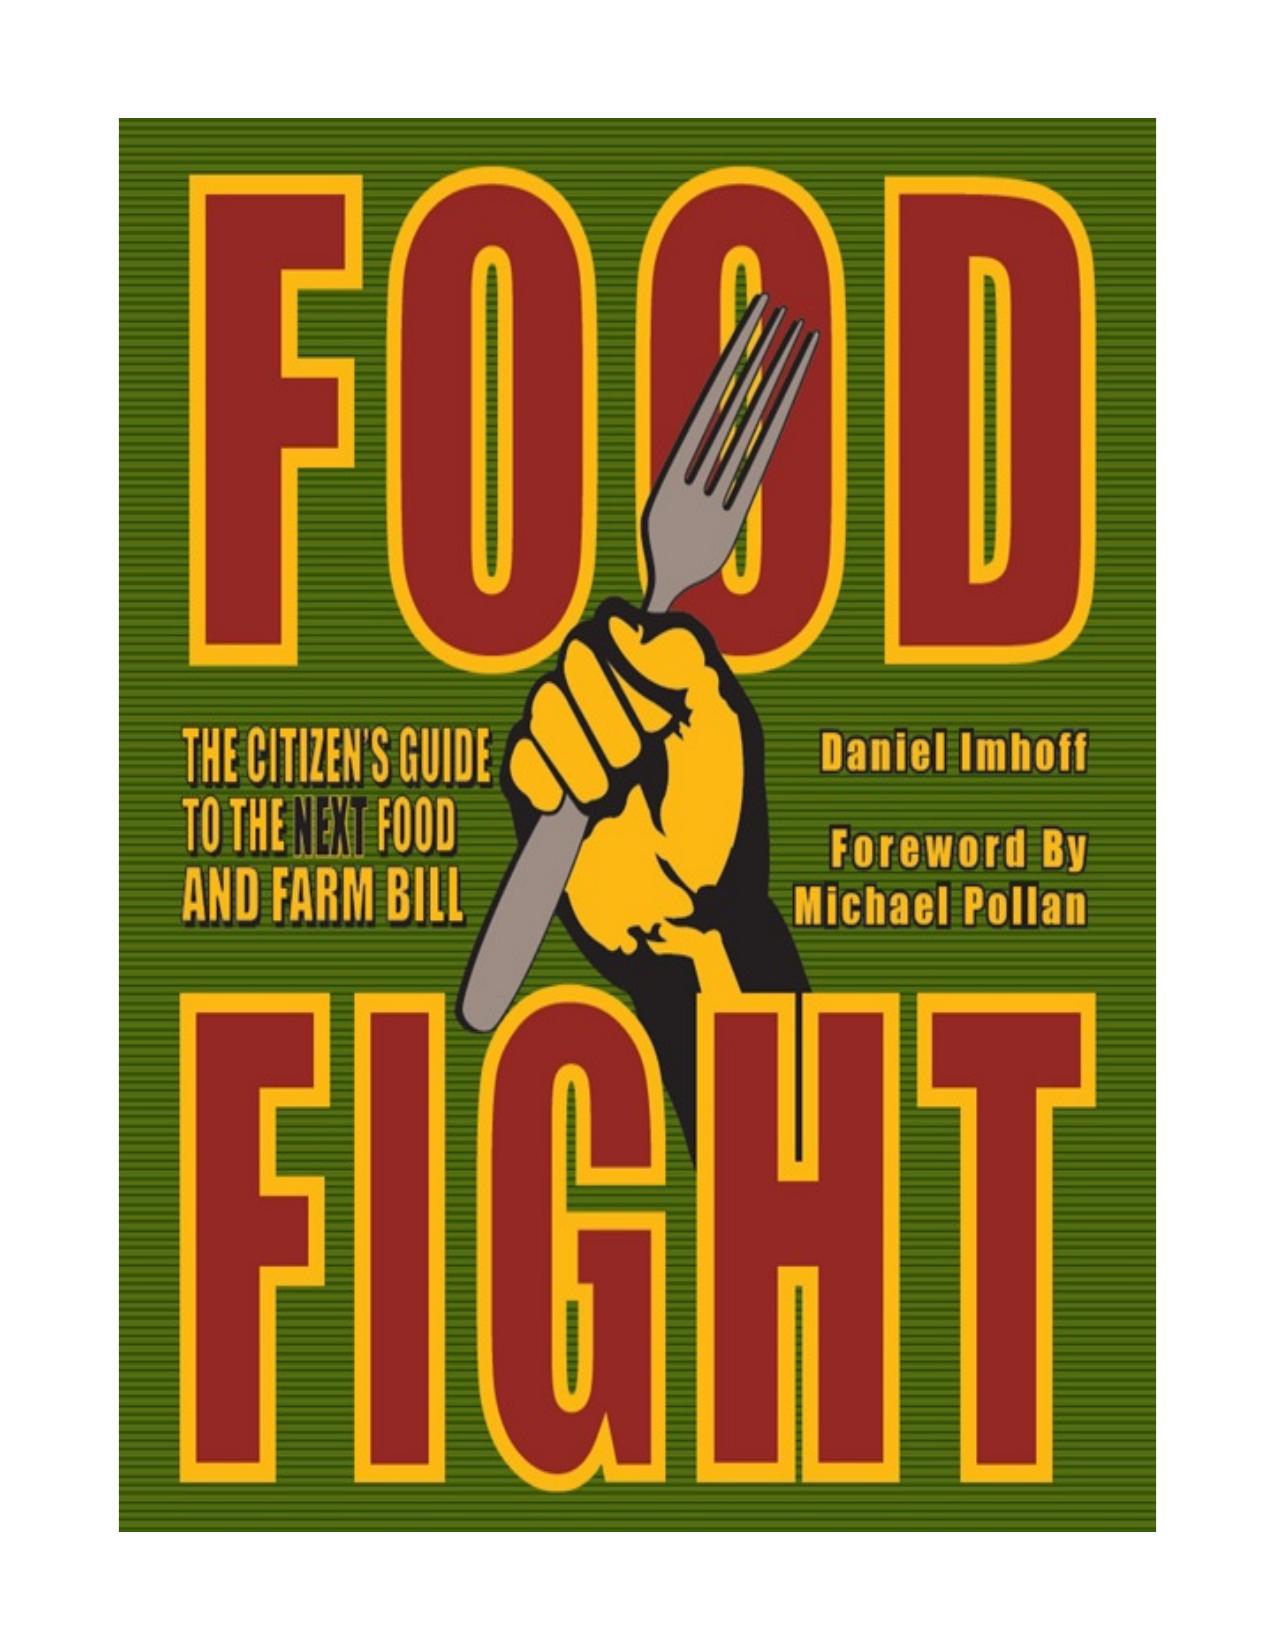 Food Fight The Citizen's Guide to the Next Food and Farm Bill - Imhoff, Daniel, Pollan, Michael, Kirschenmann, Fred.jpg